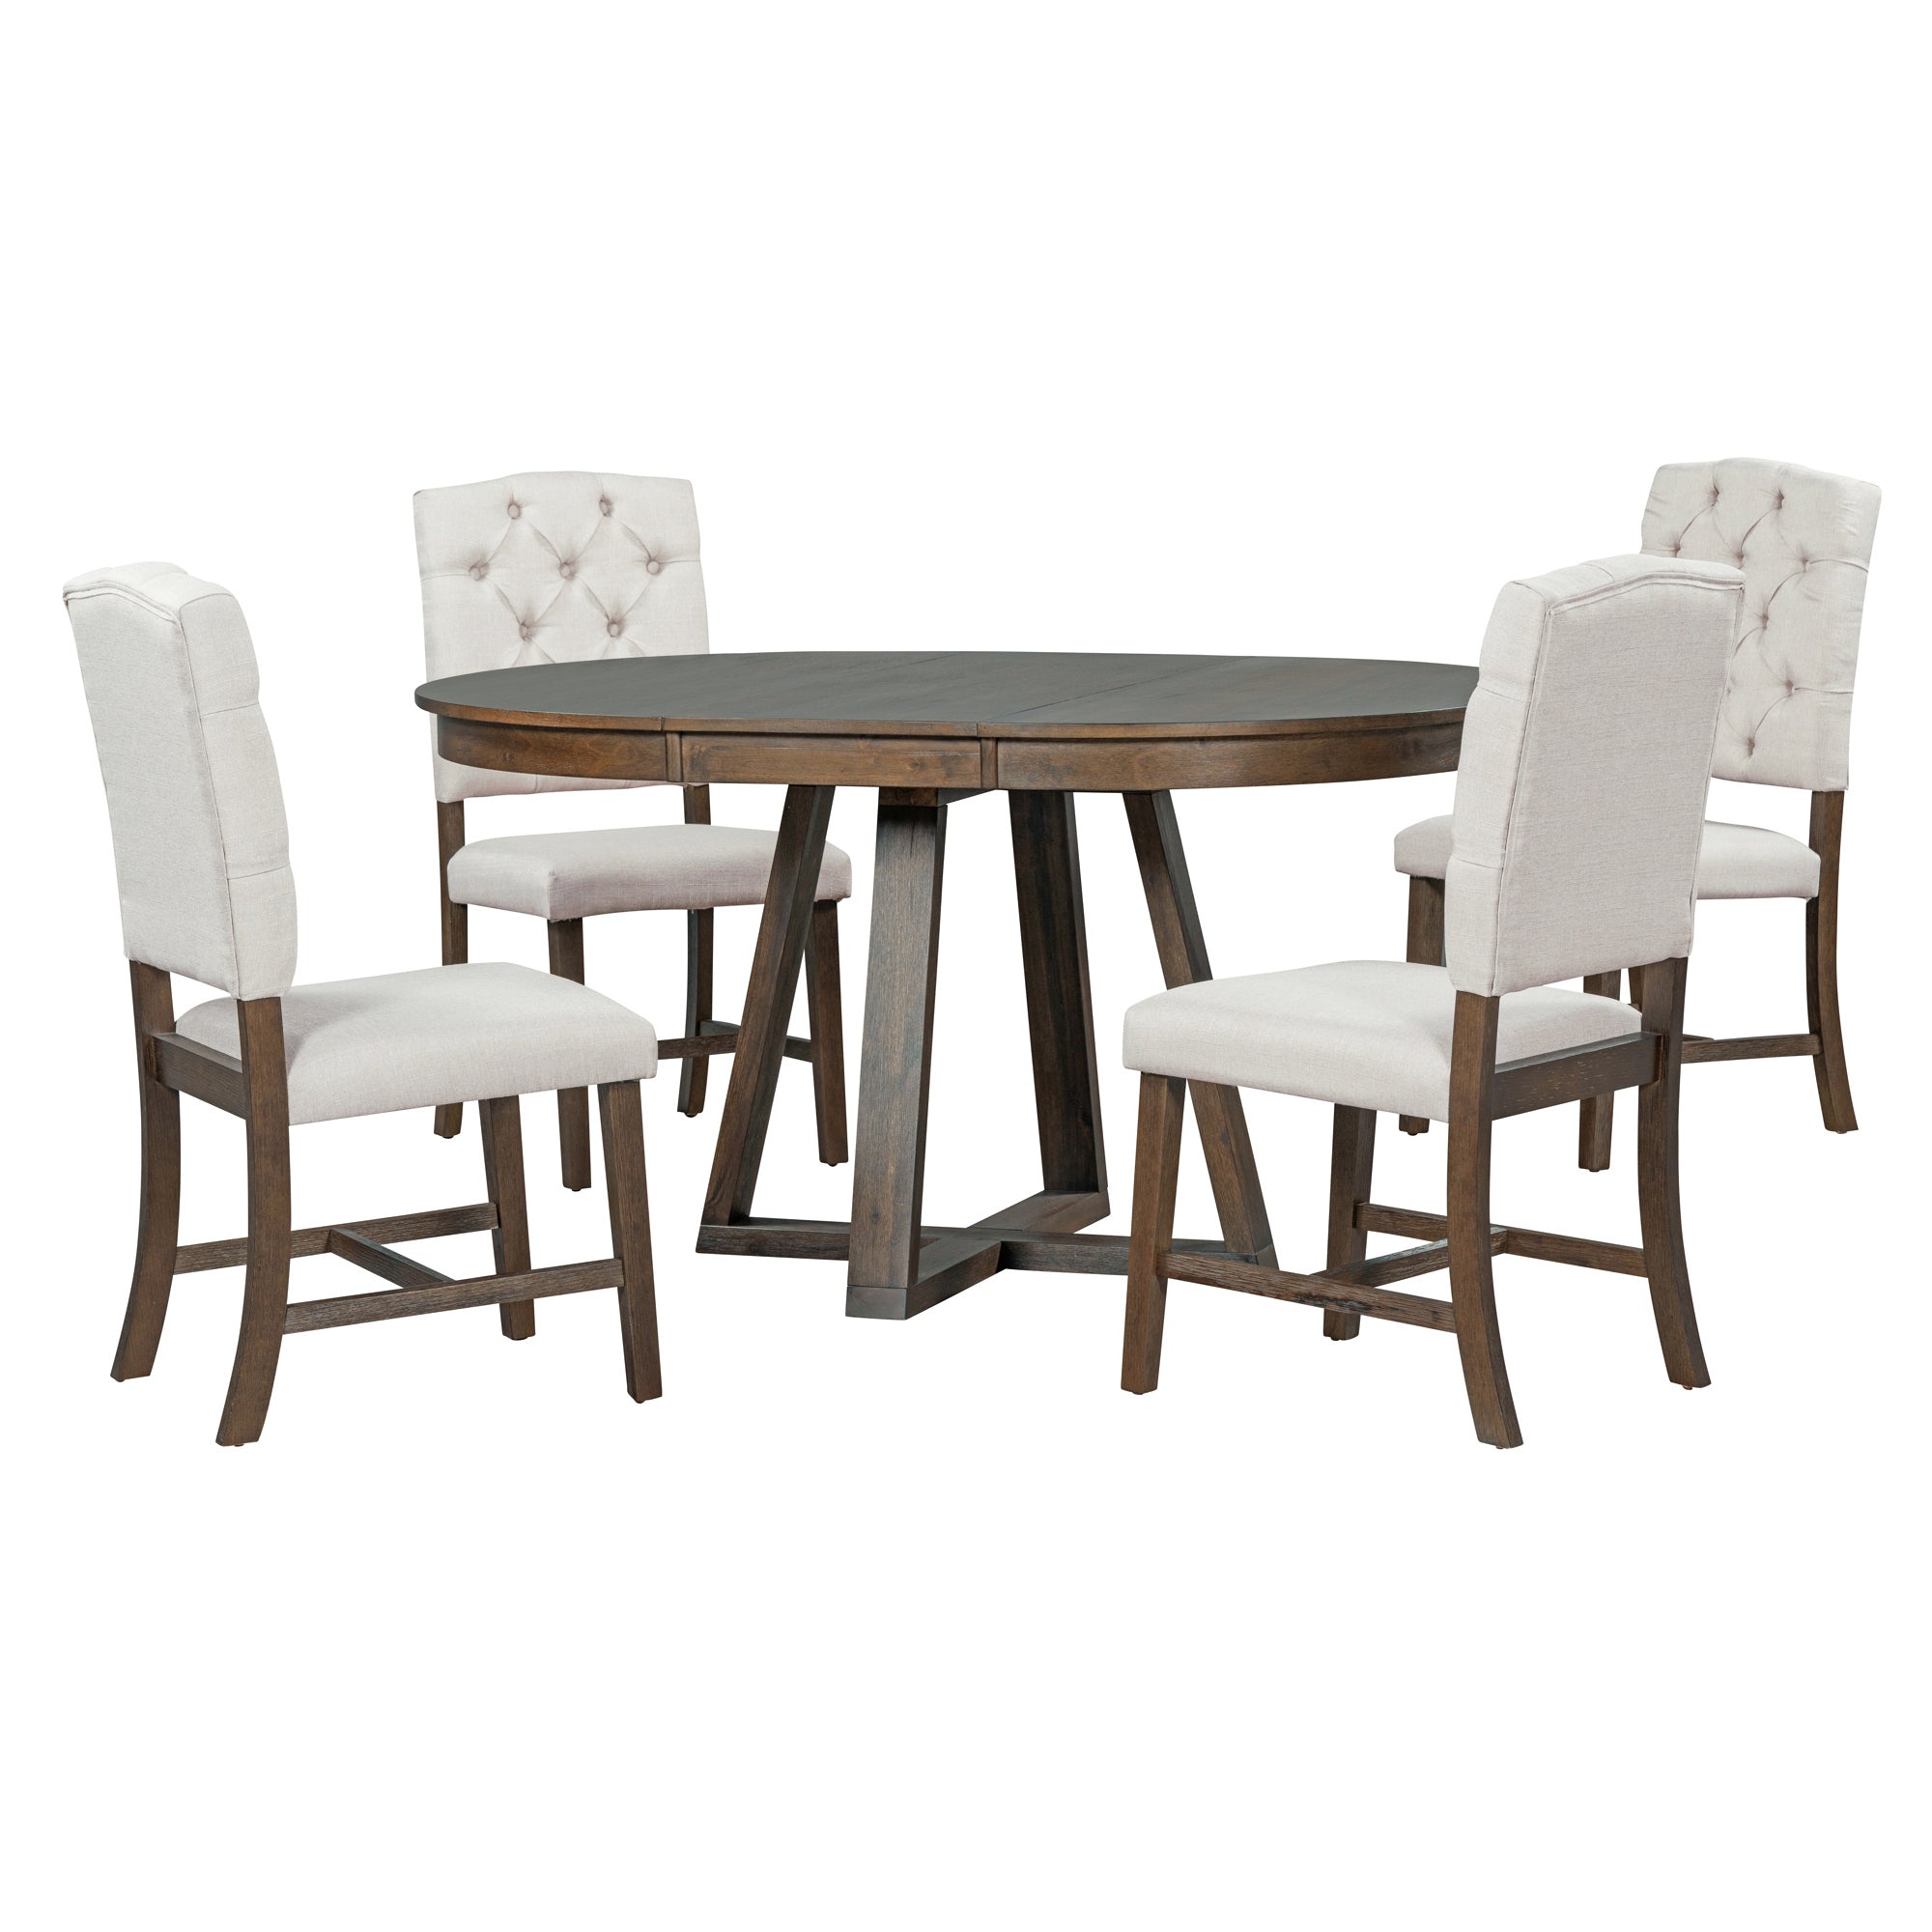 5-Piece Retro Functional Dining Set, Round Table with a 16"W Leaf and 4 Upholstered Chairs - Walnut